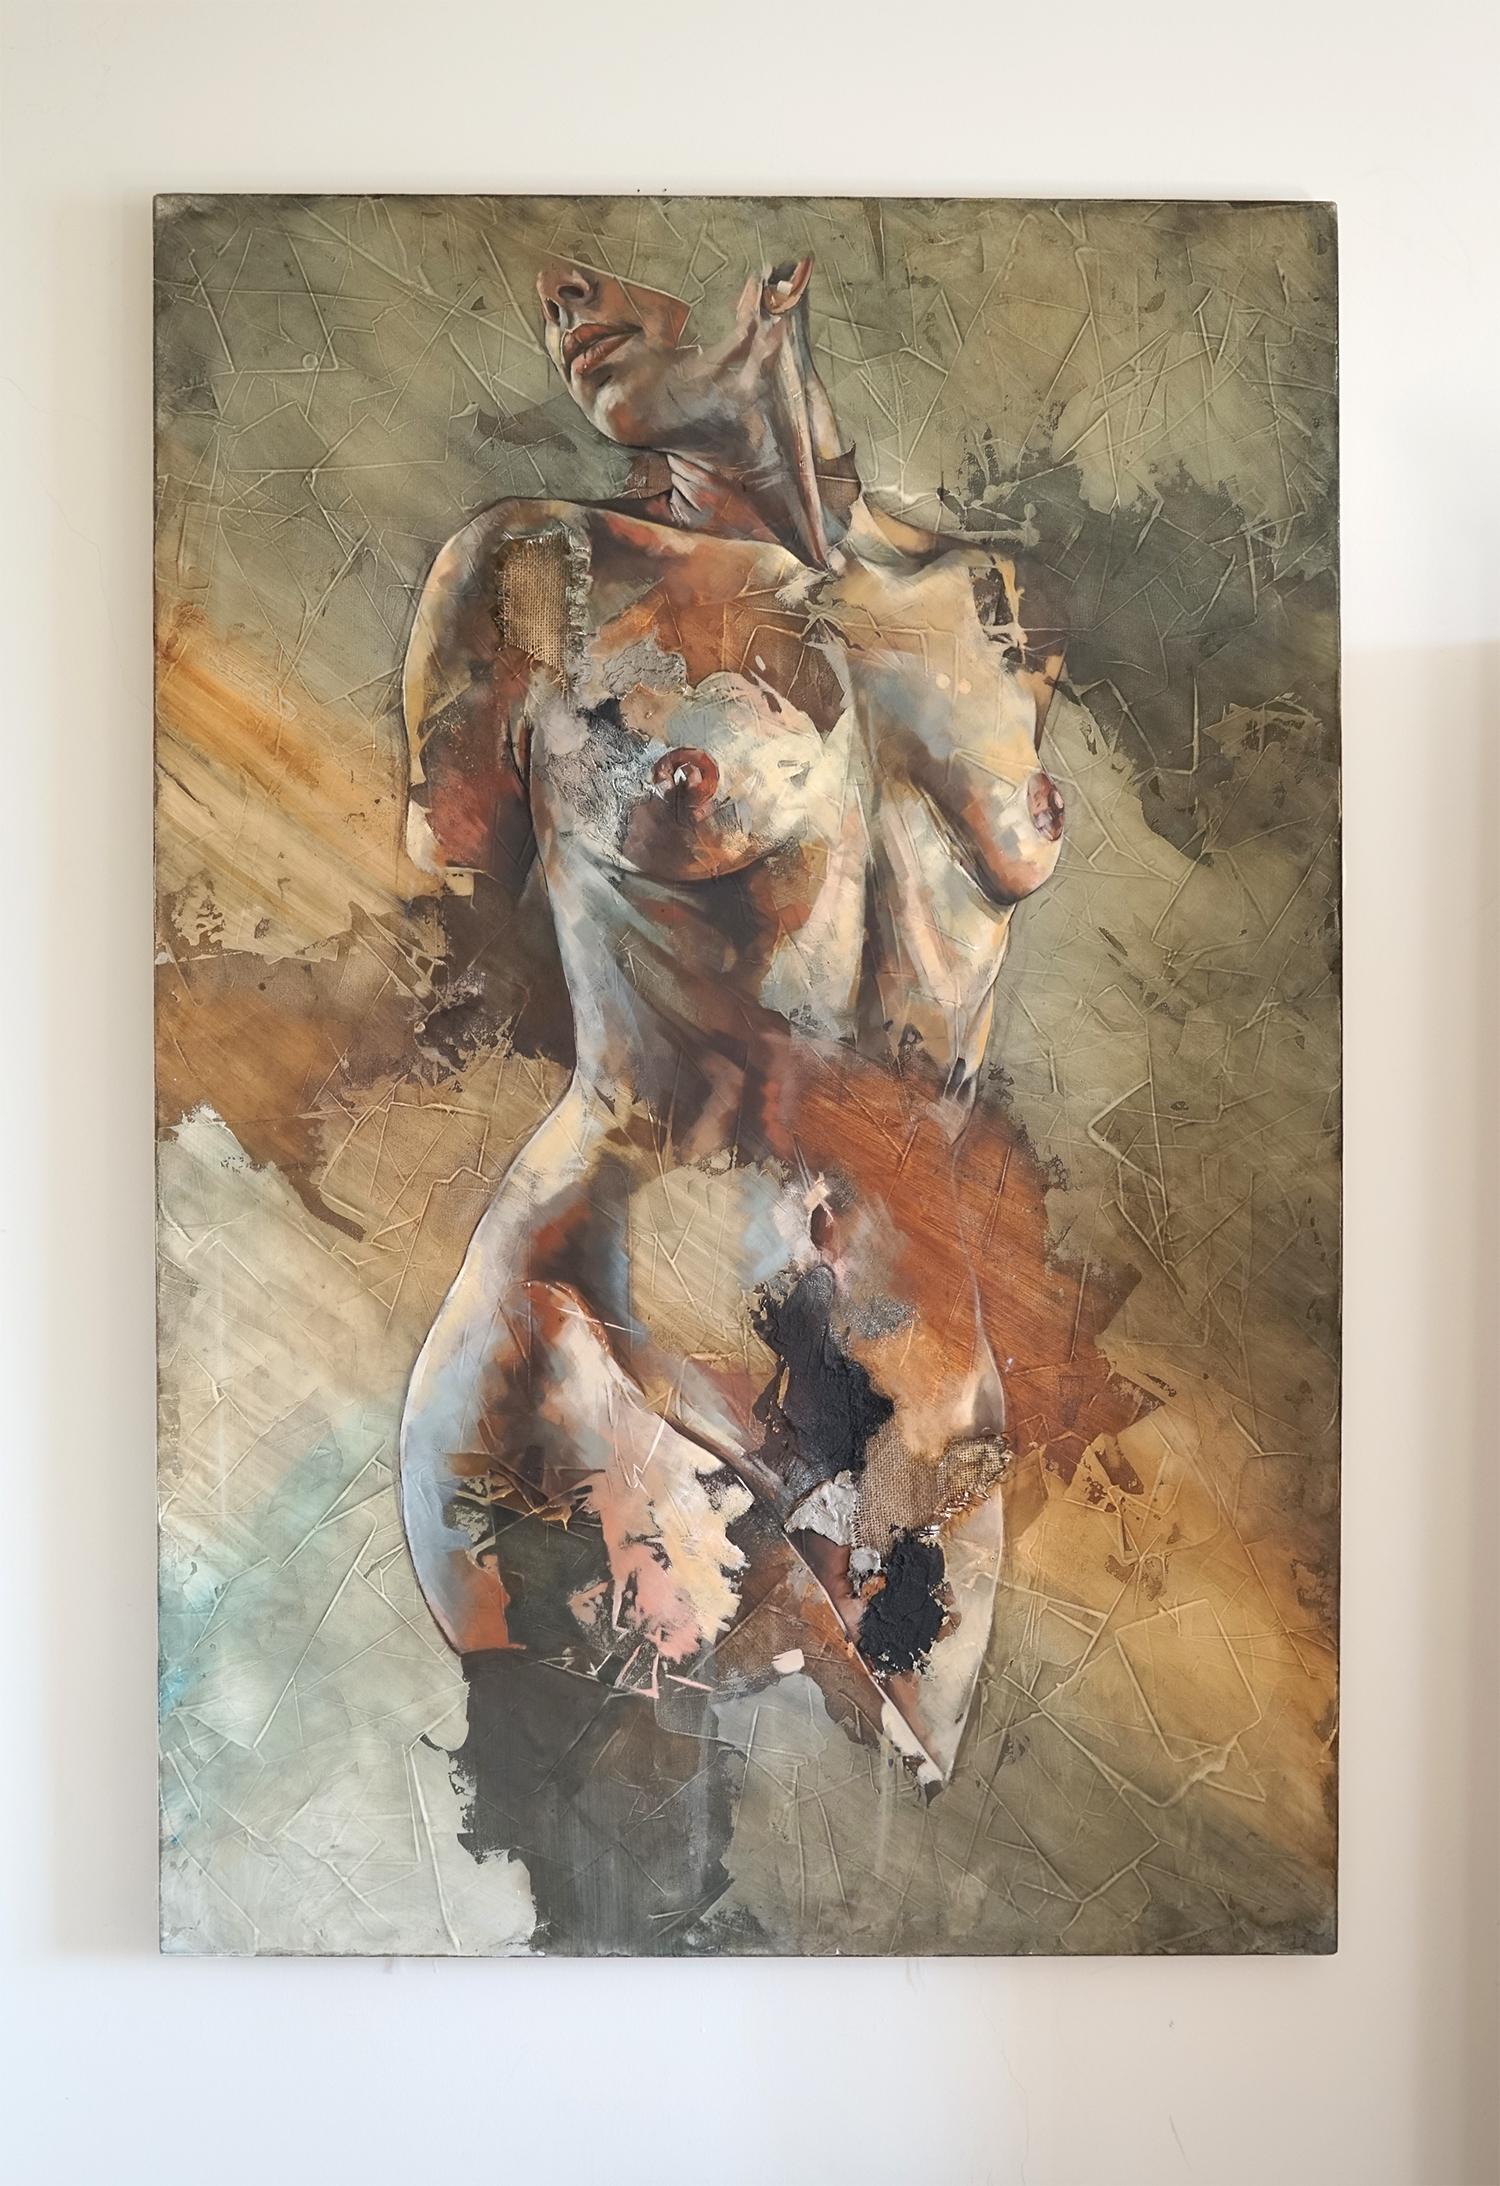 Ineffable by Francisco Jimenez - Contemporary  Abstract Figurative painting - Painting by Francisco Jose Jimenez